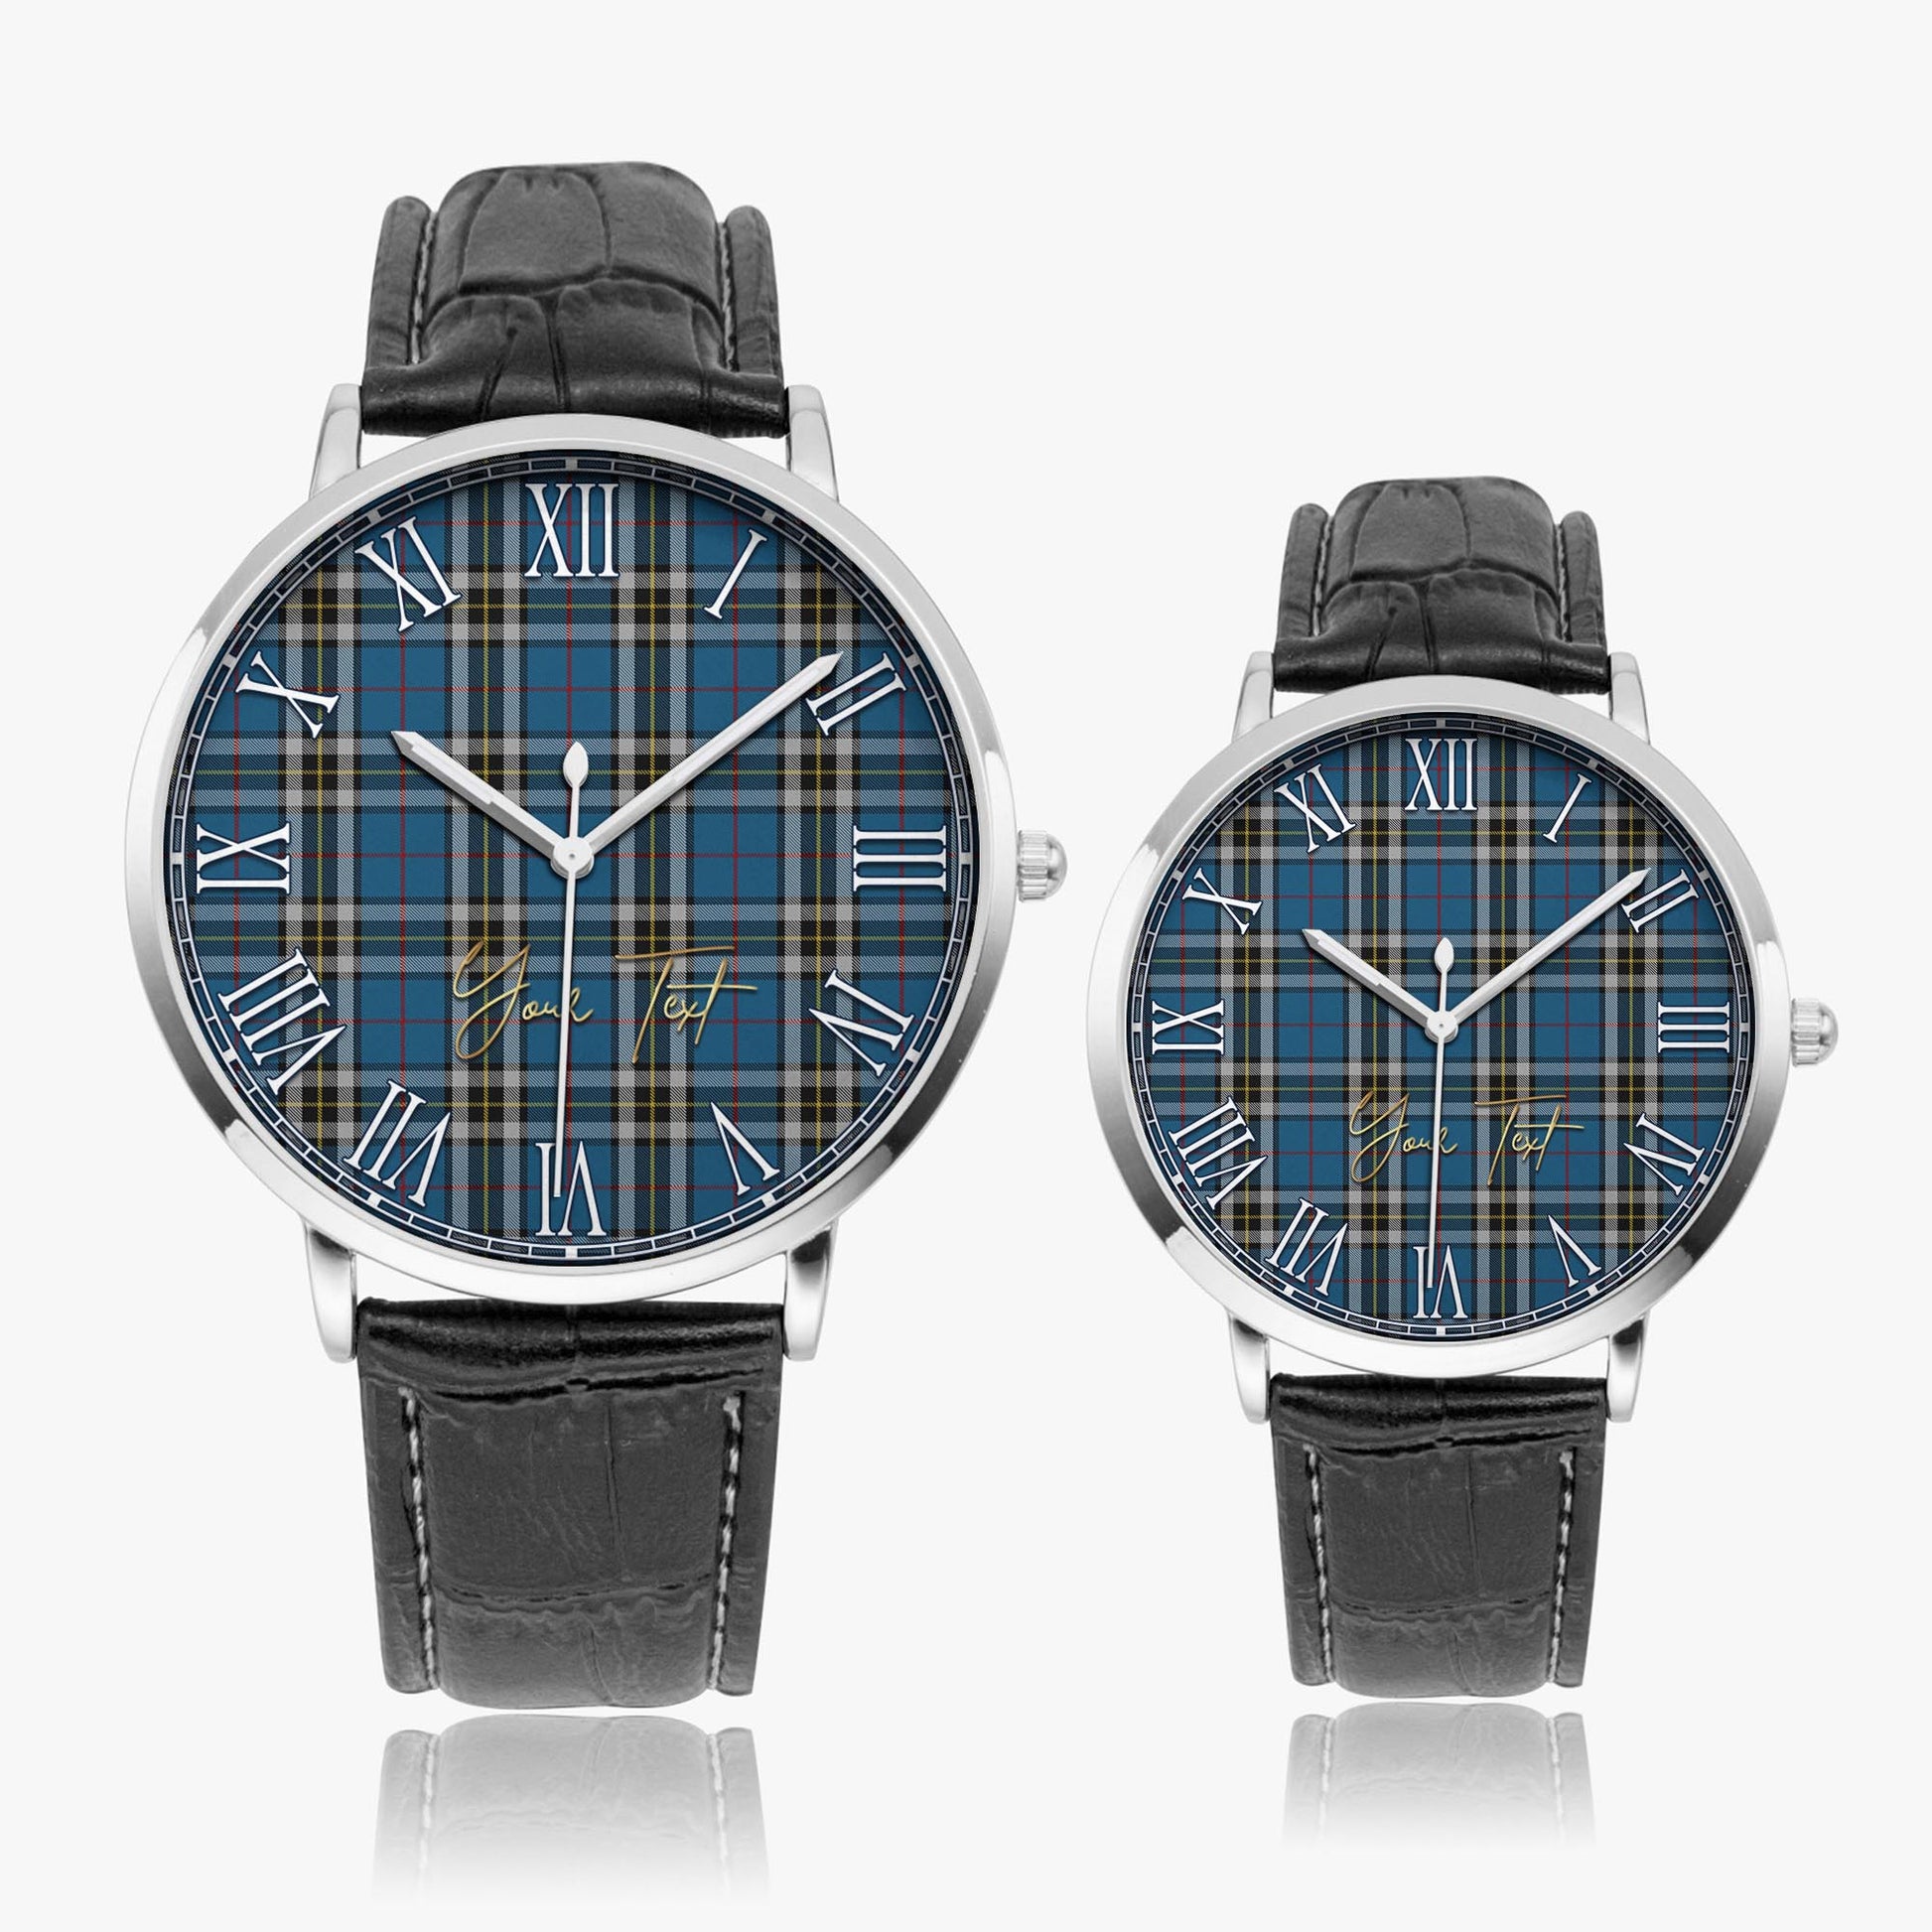 Thomson Dress Blue Tartan Personalized Your Text Leather Trap Quartz Watch Ultra Thin Silver Case With Black Leather Strap - Tartanvibesclothing Shop